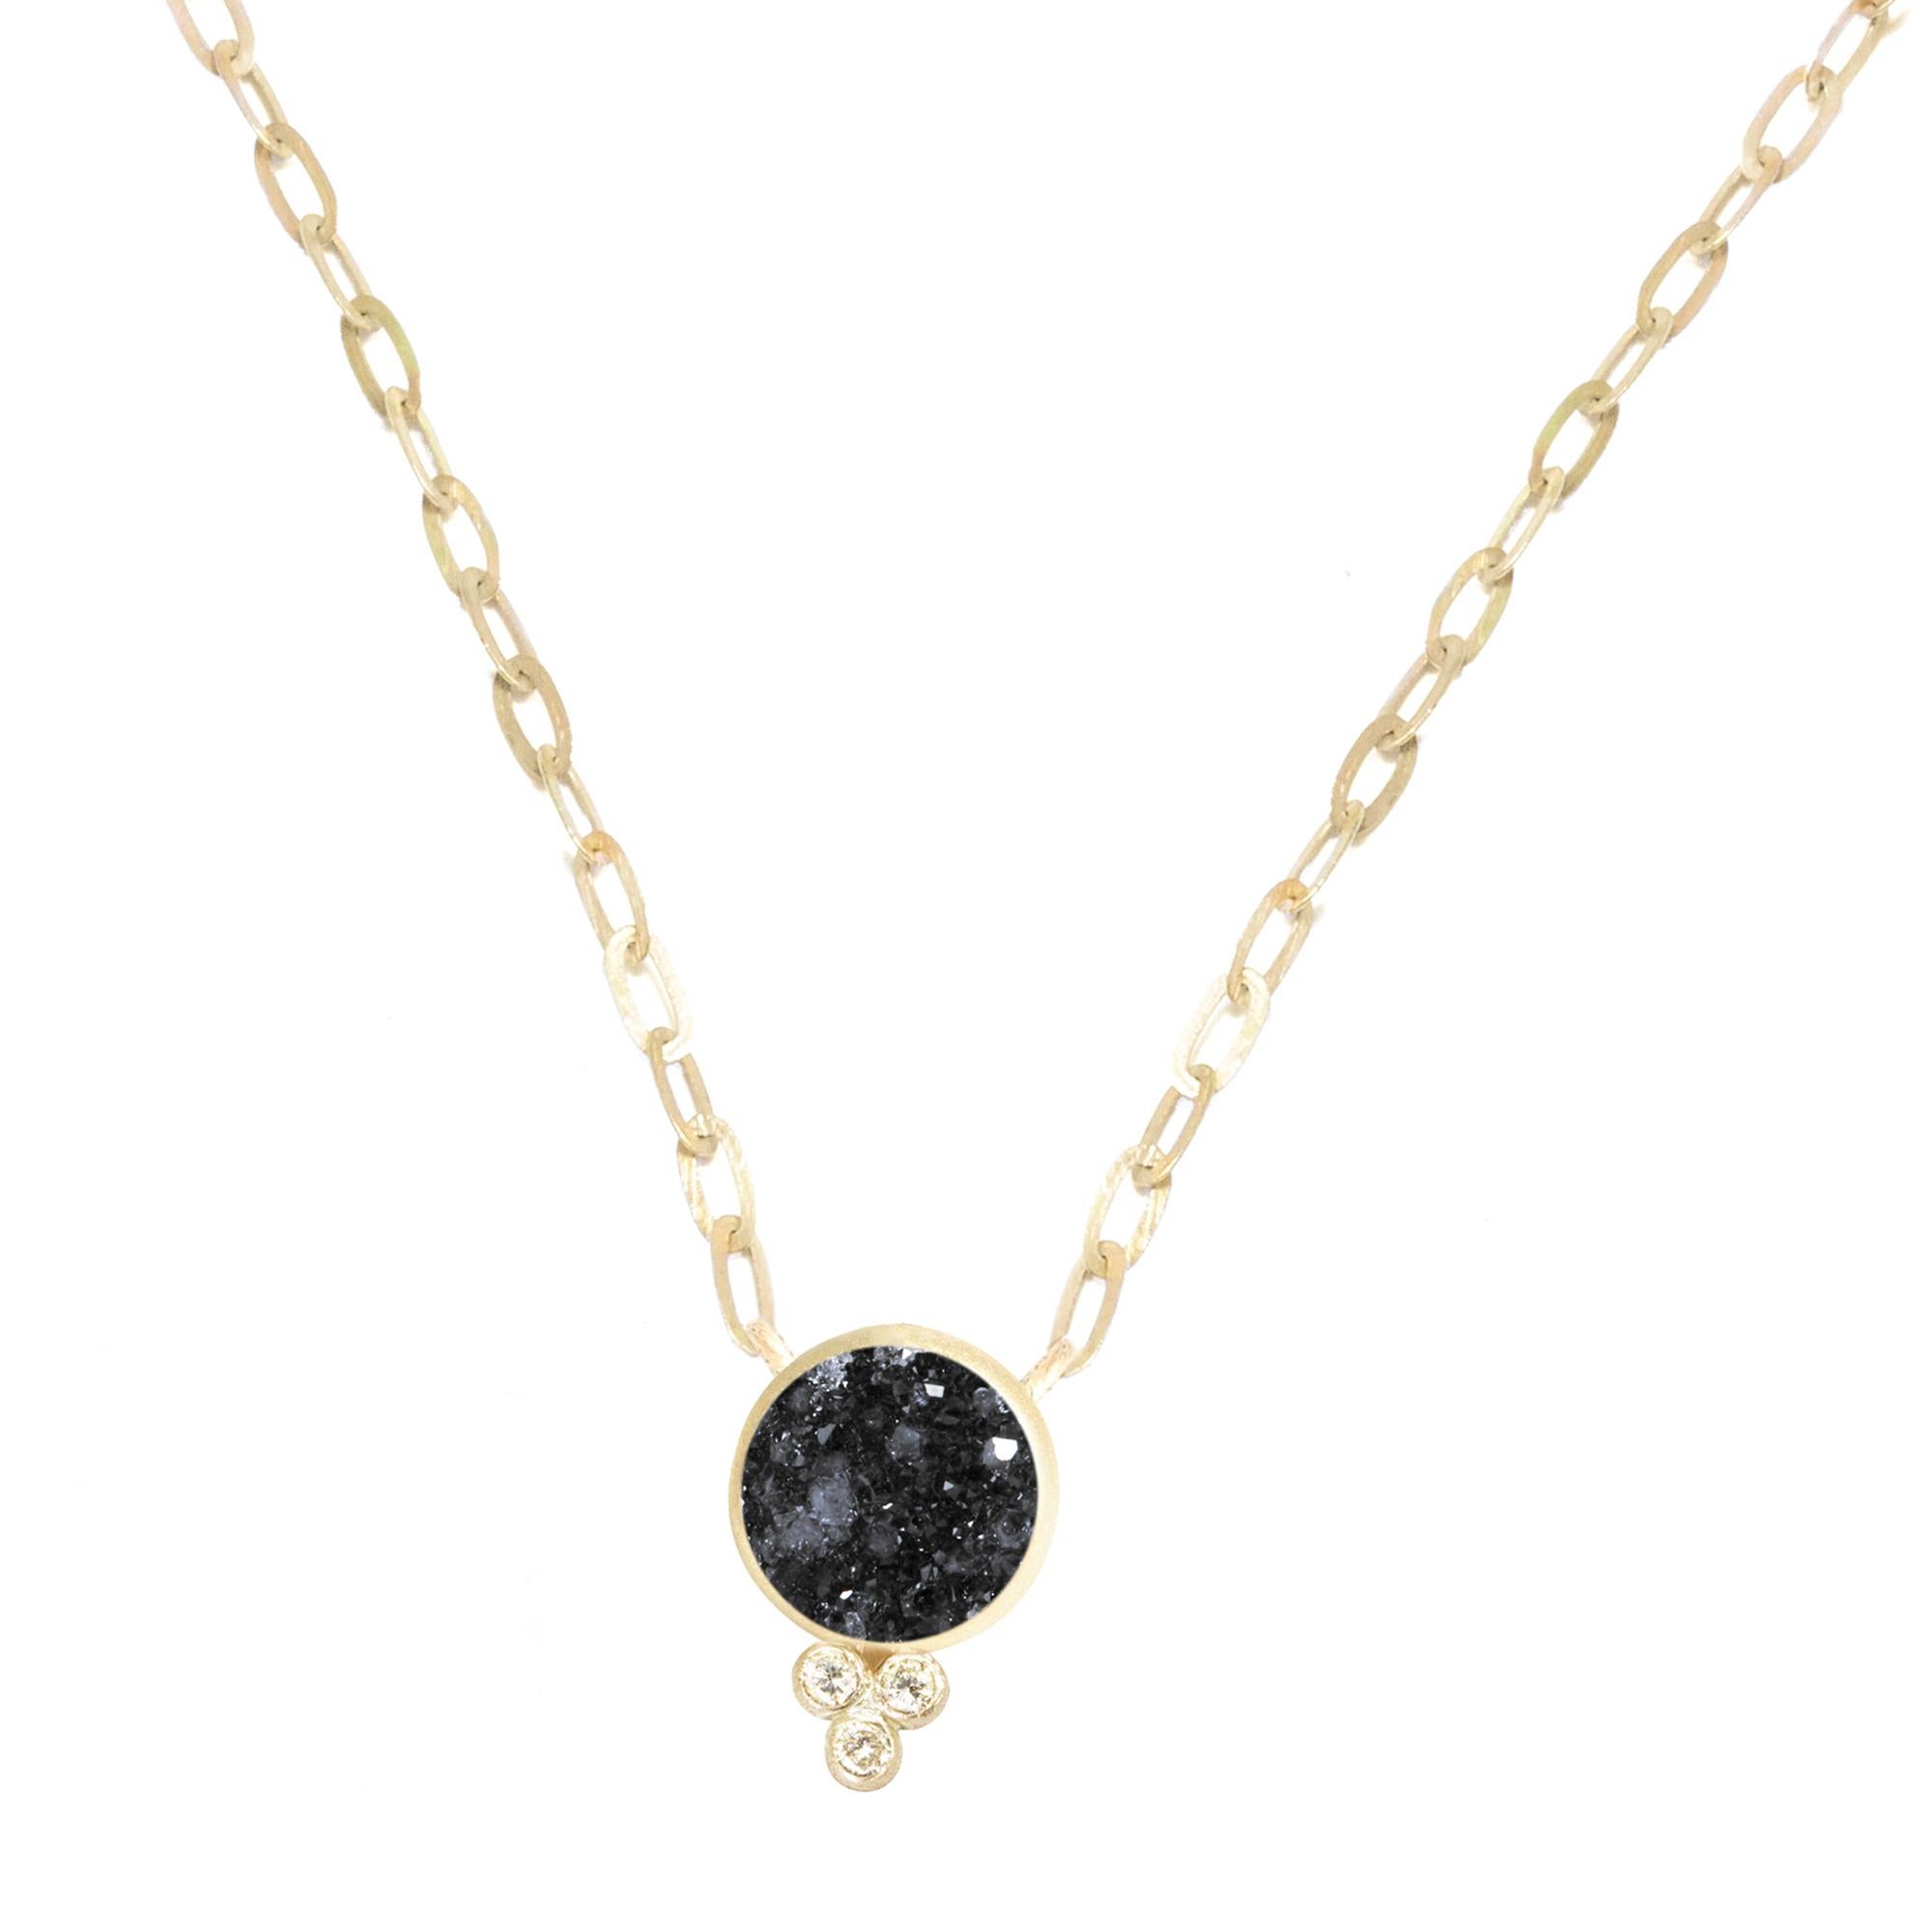 Square dance: Designed with Black druzy in a textured gold bezel on a delicate link chain, our diamond-accented Ariana Gold Necklace can be worn on its own o layered with other styles.

Metal: 18K Yellow Gold
Stone carat: 3.5
Diamond carat: